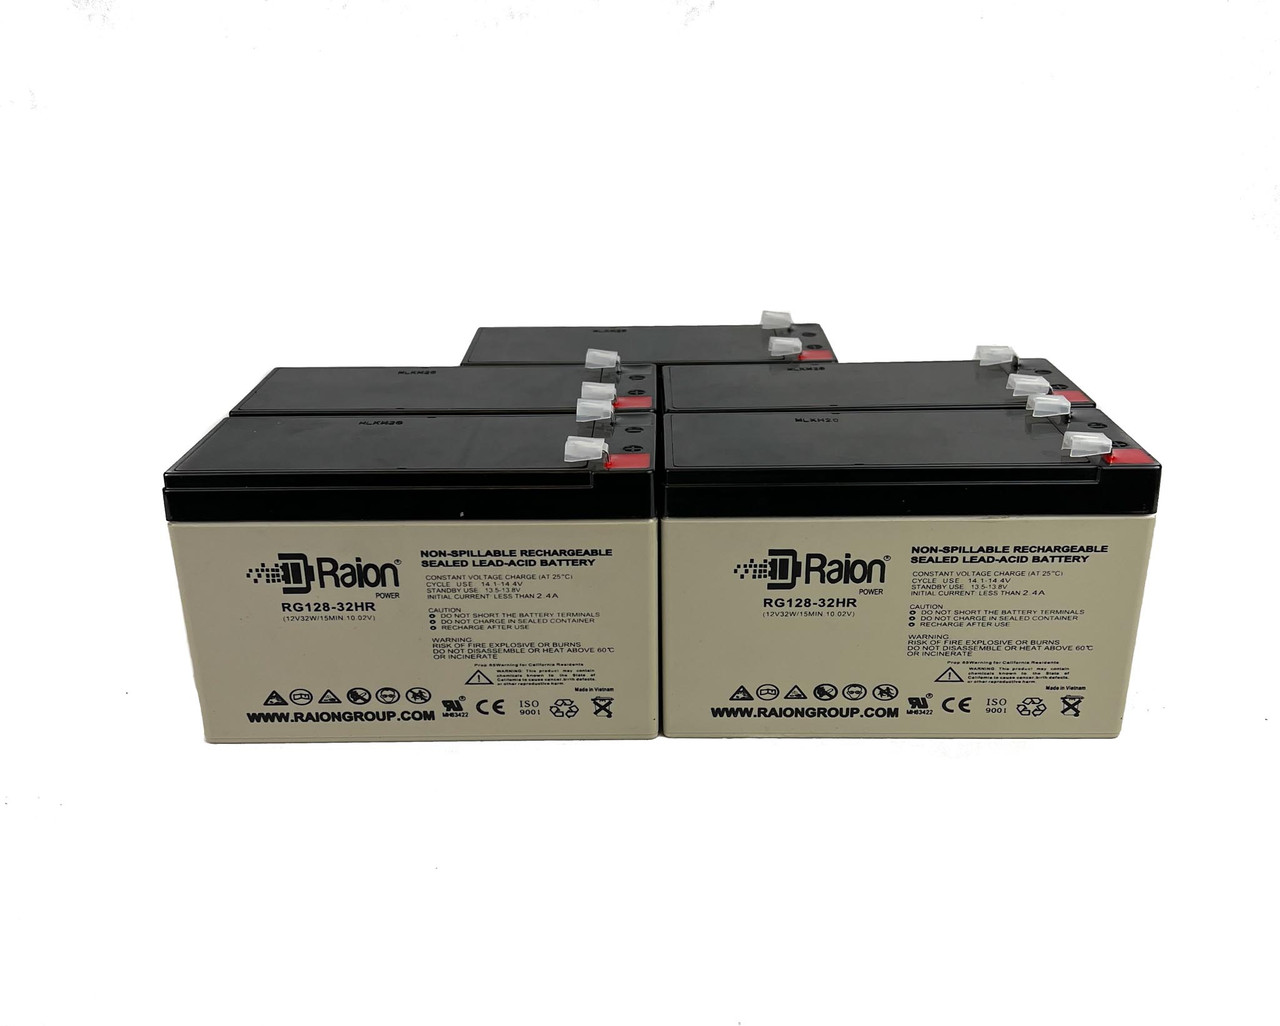 Raion Power 12V 7.5Ah High Rate Discharge UPS Batteries for Minuteman CP1K - 5 Pack